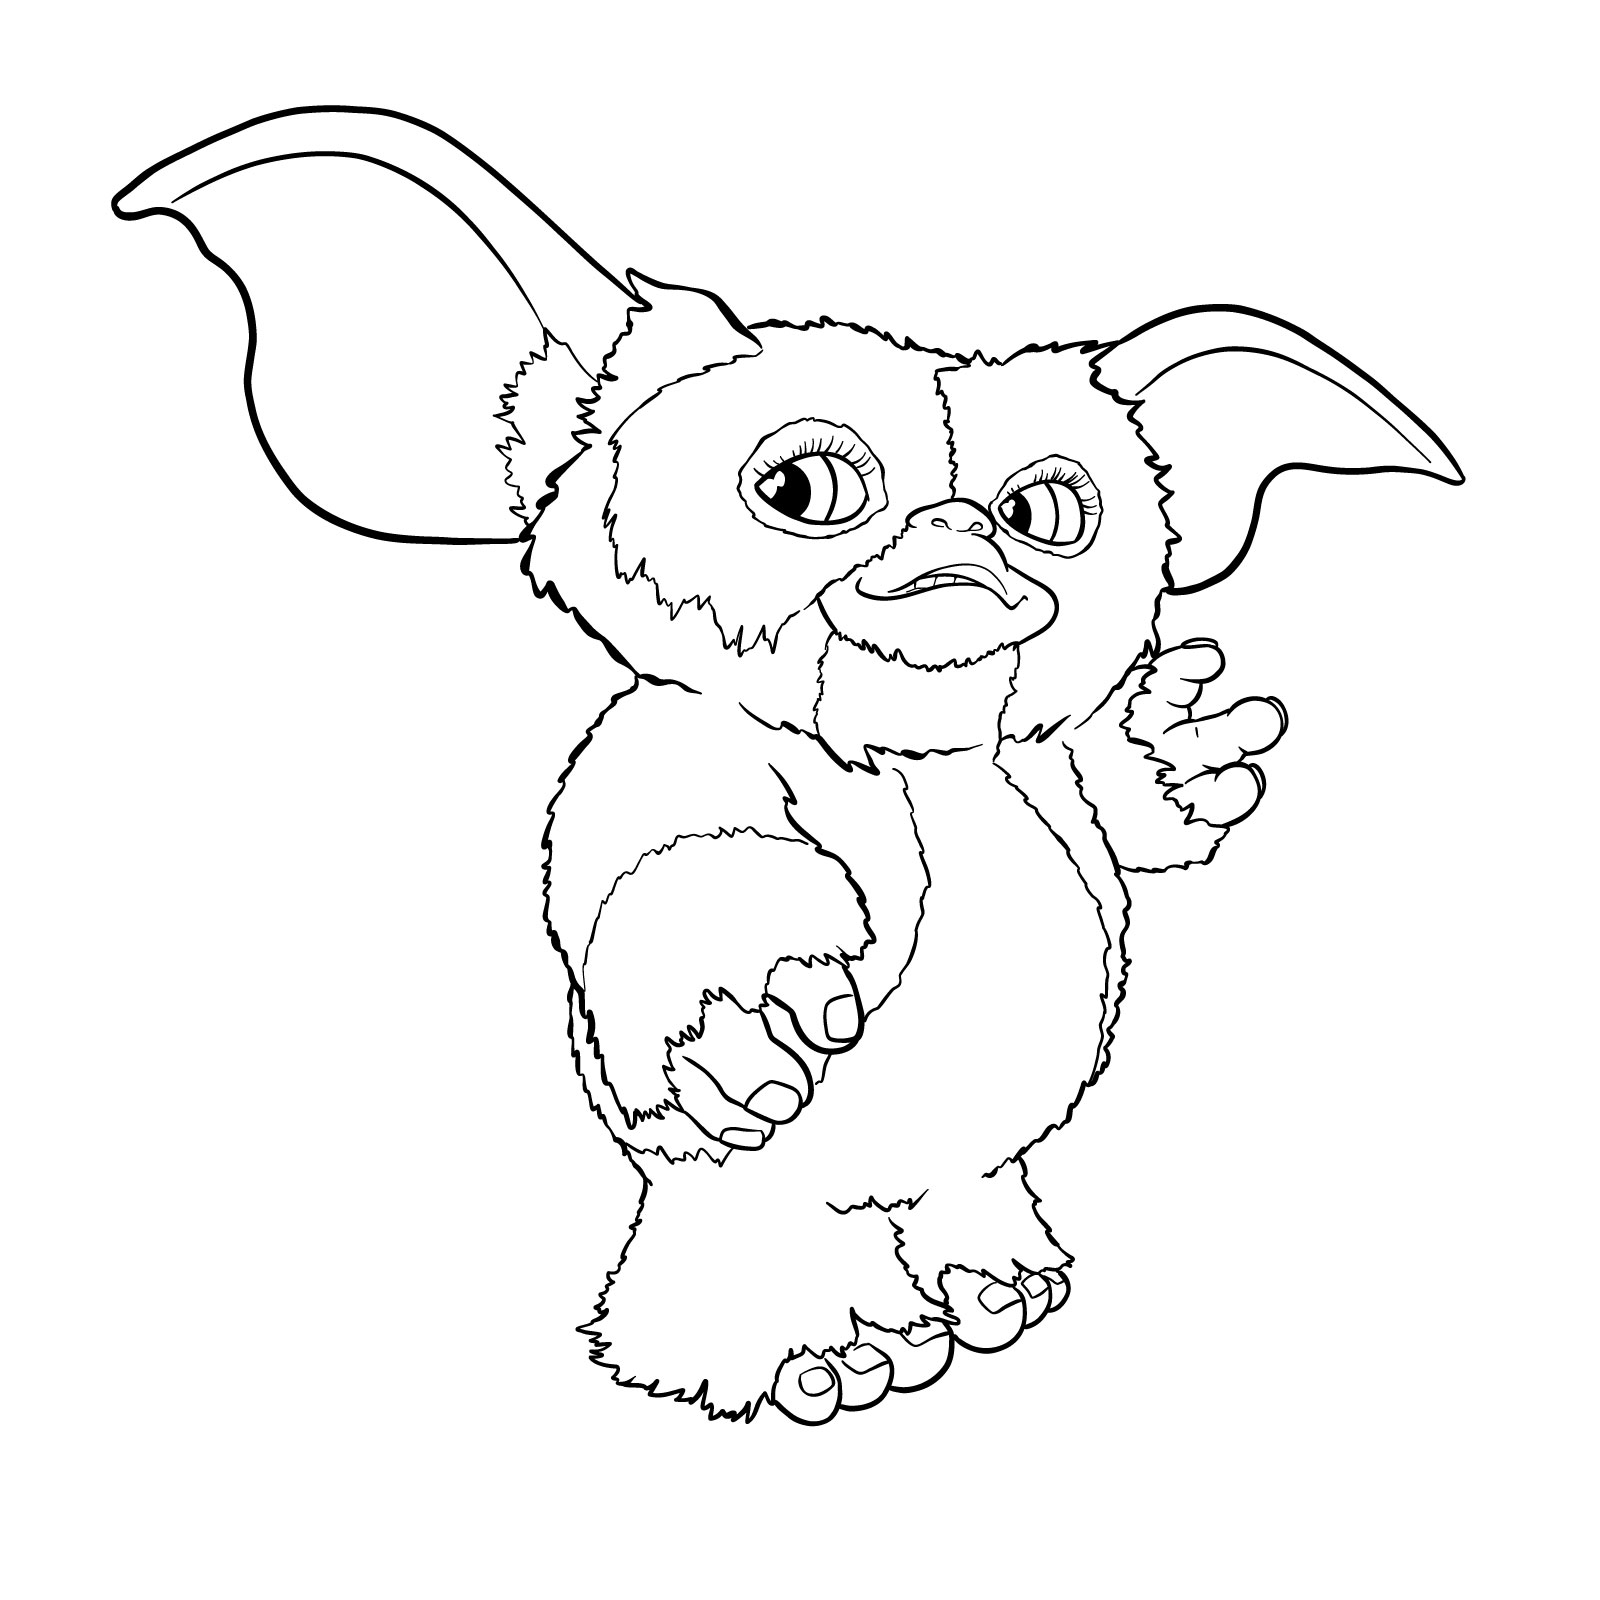 How to draw a Gremlin - final step